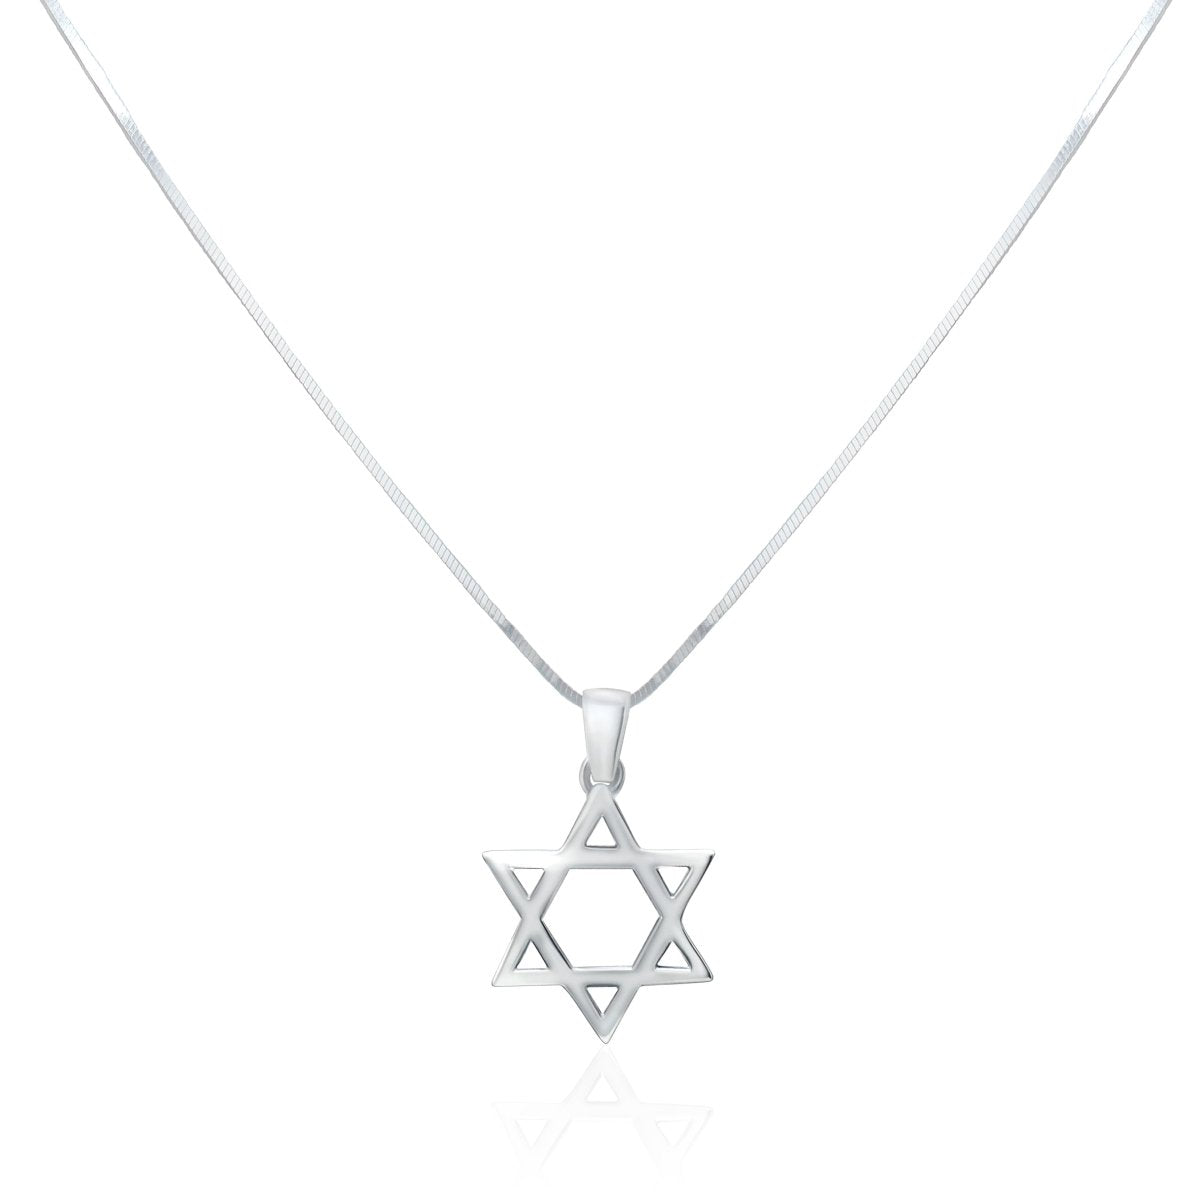 No Other Land: Silver and Gold Star of David Pendant Necklace for Men,  Jewish Jewelry | Judaica Web Store